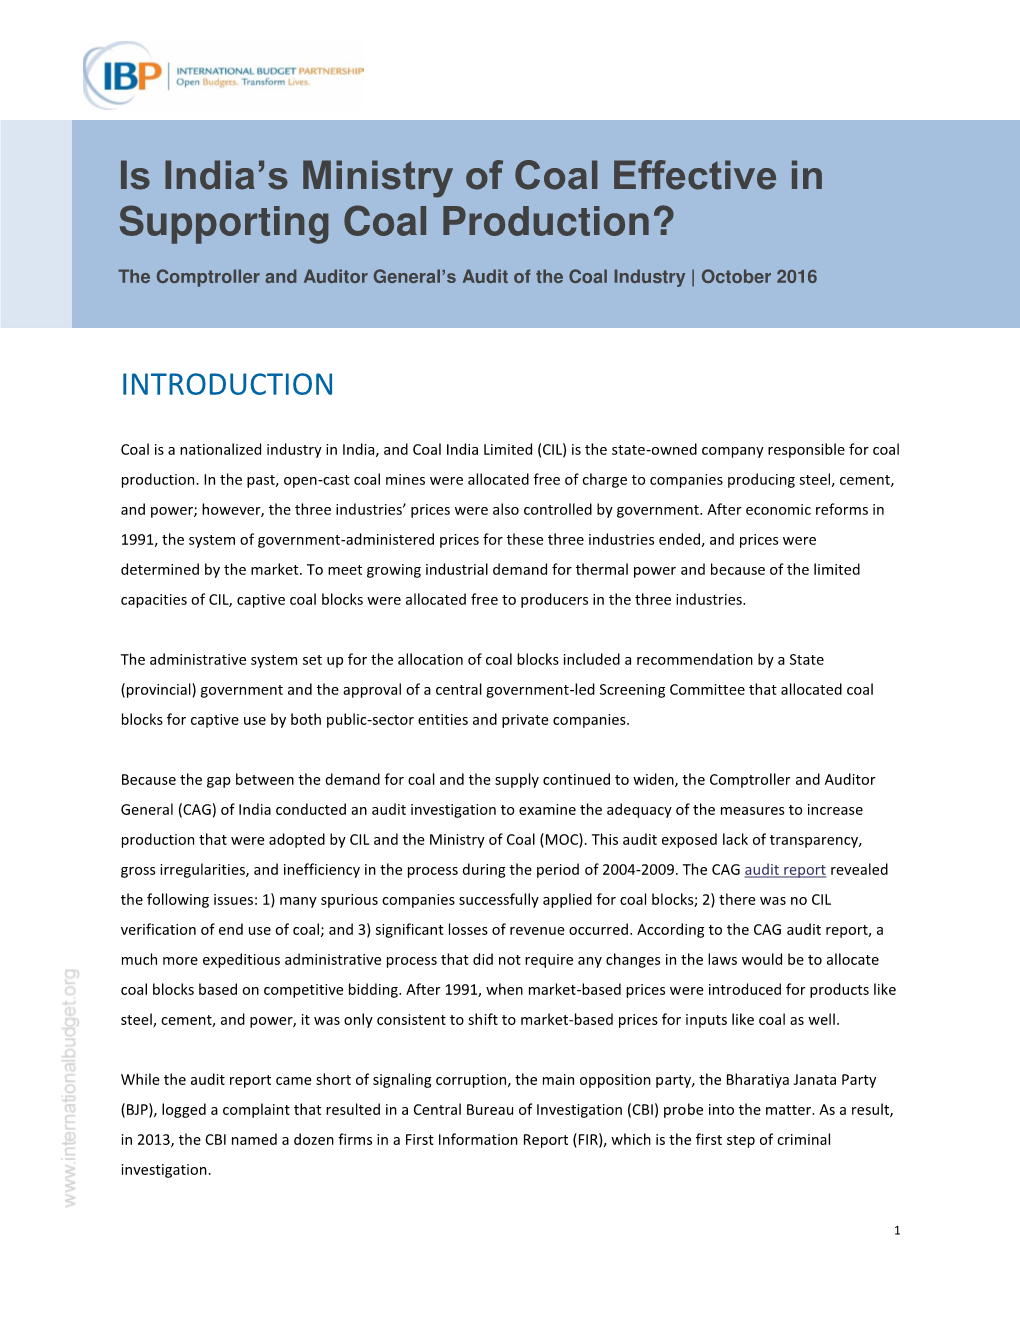 Is India's Ministry of Coal Effective in Supporting Coal Production?